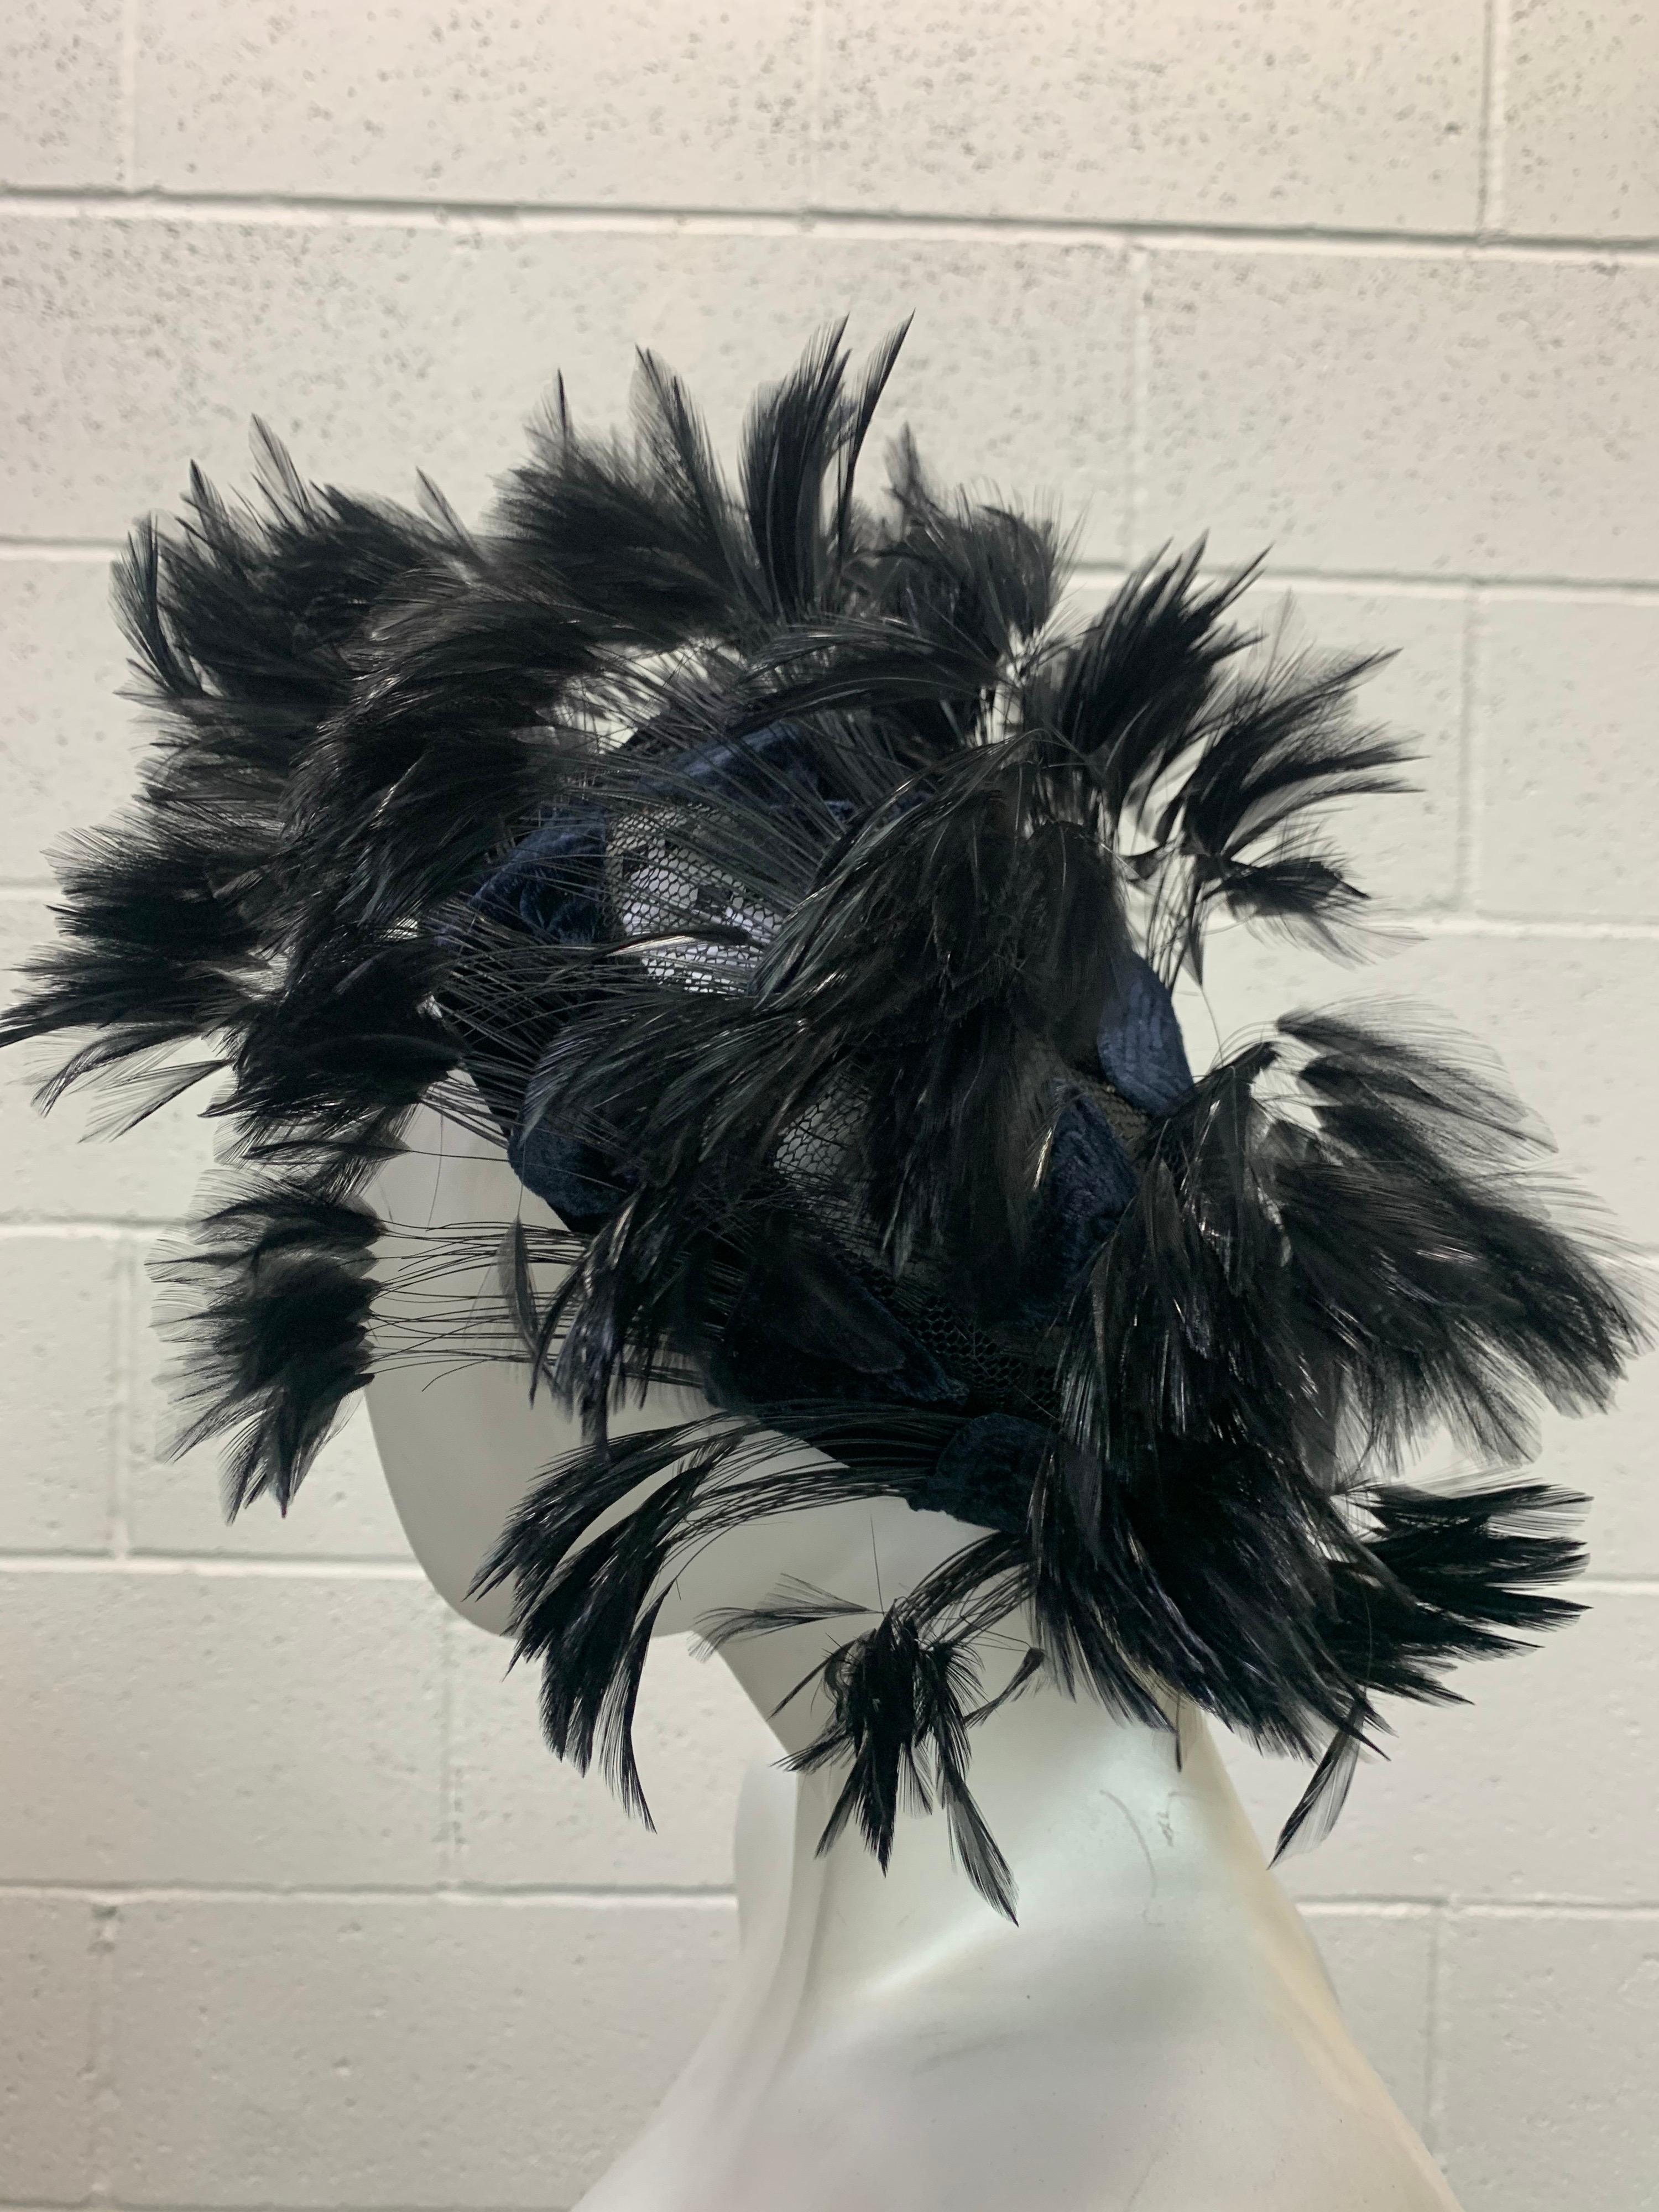 1950s Christian Dior Chapeaux black feather tufted turban with velvet triangle applique details. Satin band and a tulle structured crown are covered in applied feathers and velvet stitched triangles. Quite a striking silhouette with the wisps of